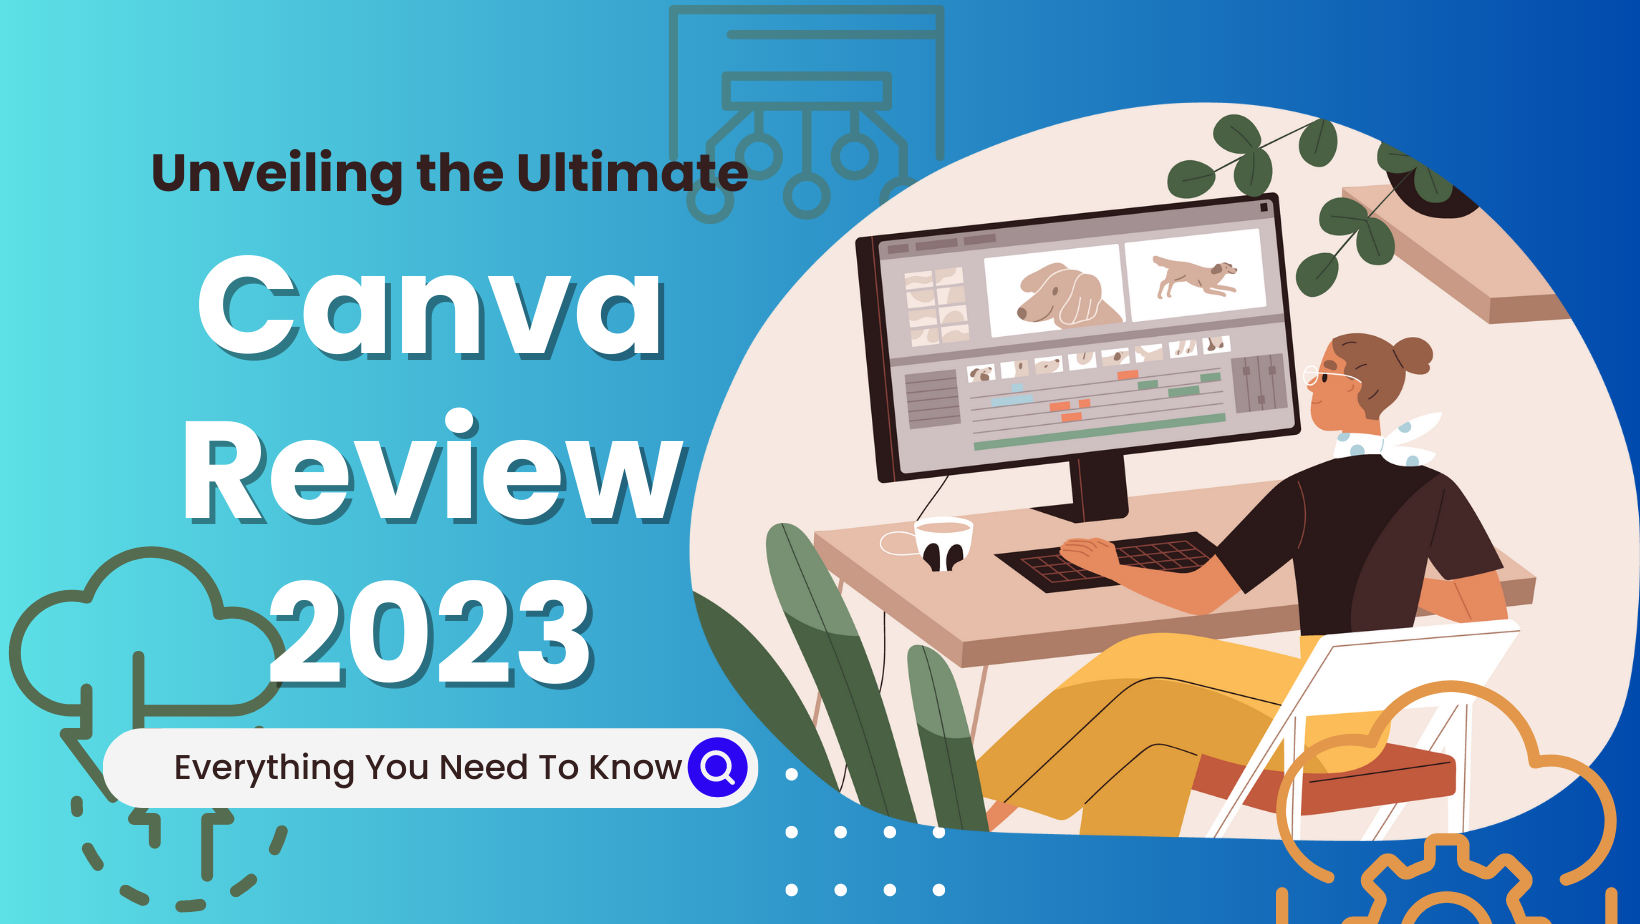 Canva - Review 2023 - PCMag Australia